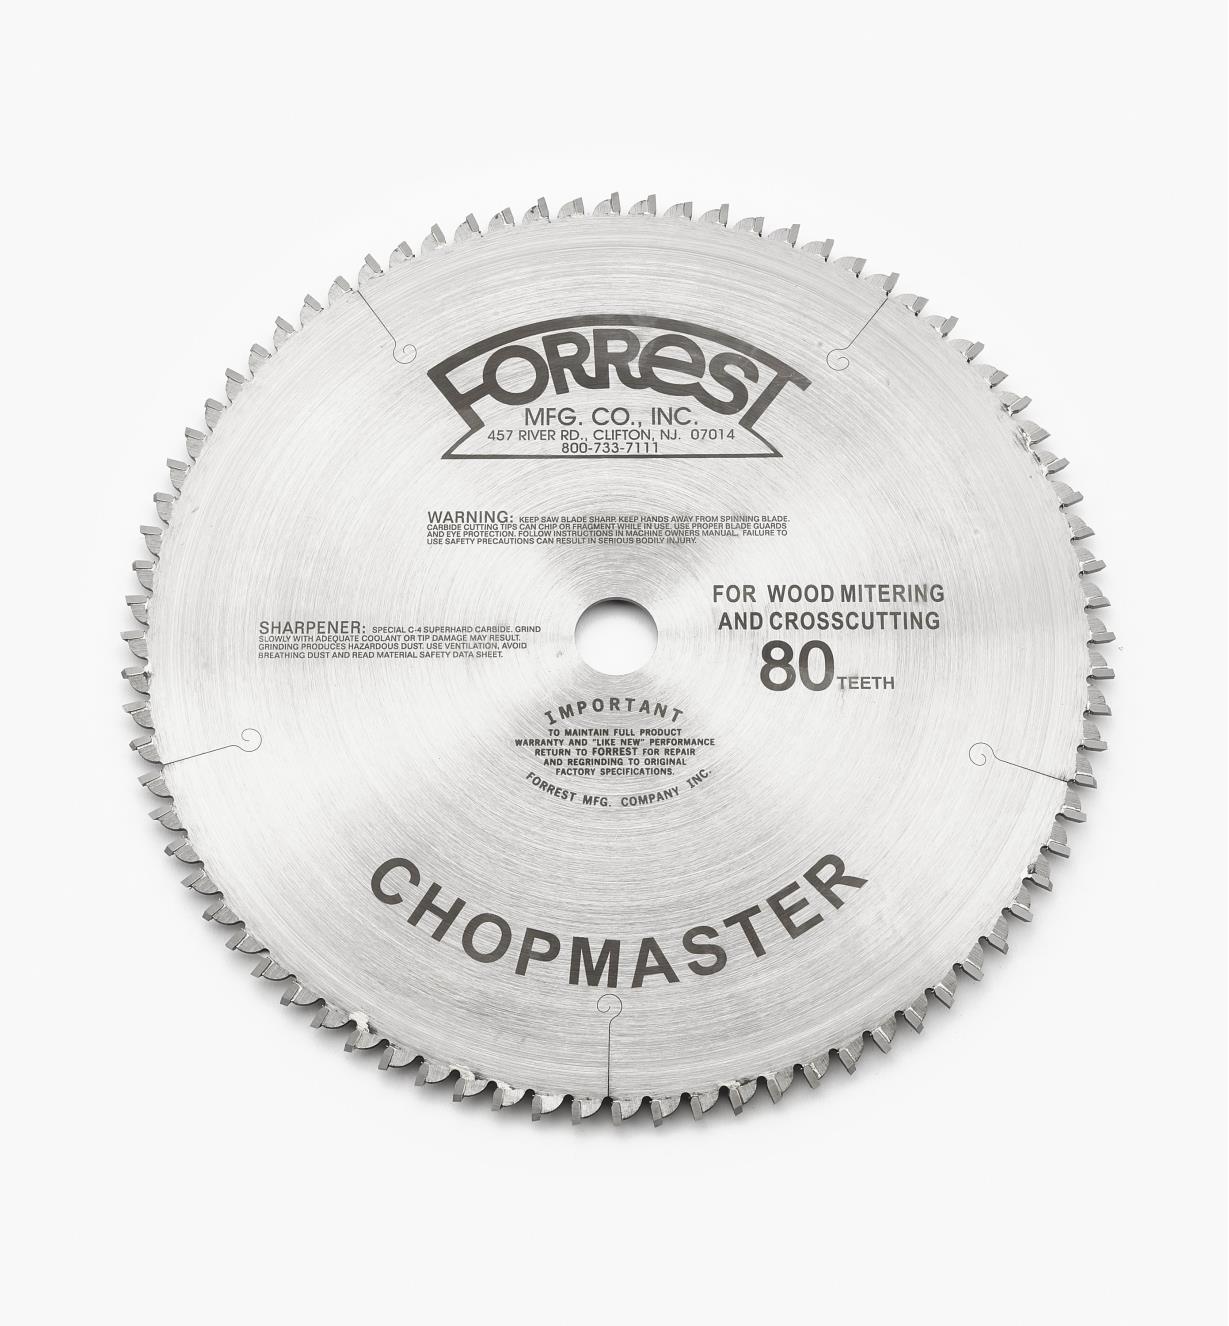 15T4152 - 12" x 80-Tooth Chopmaster, 1/8" Kerf